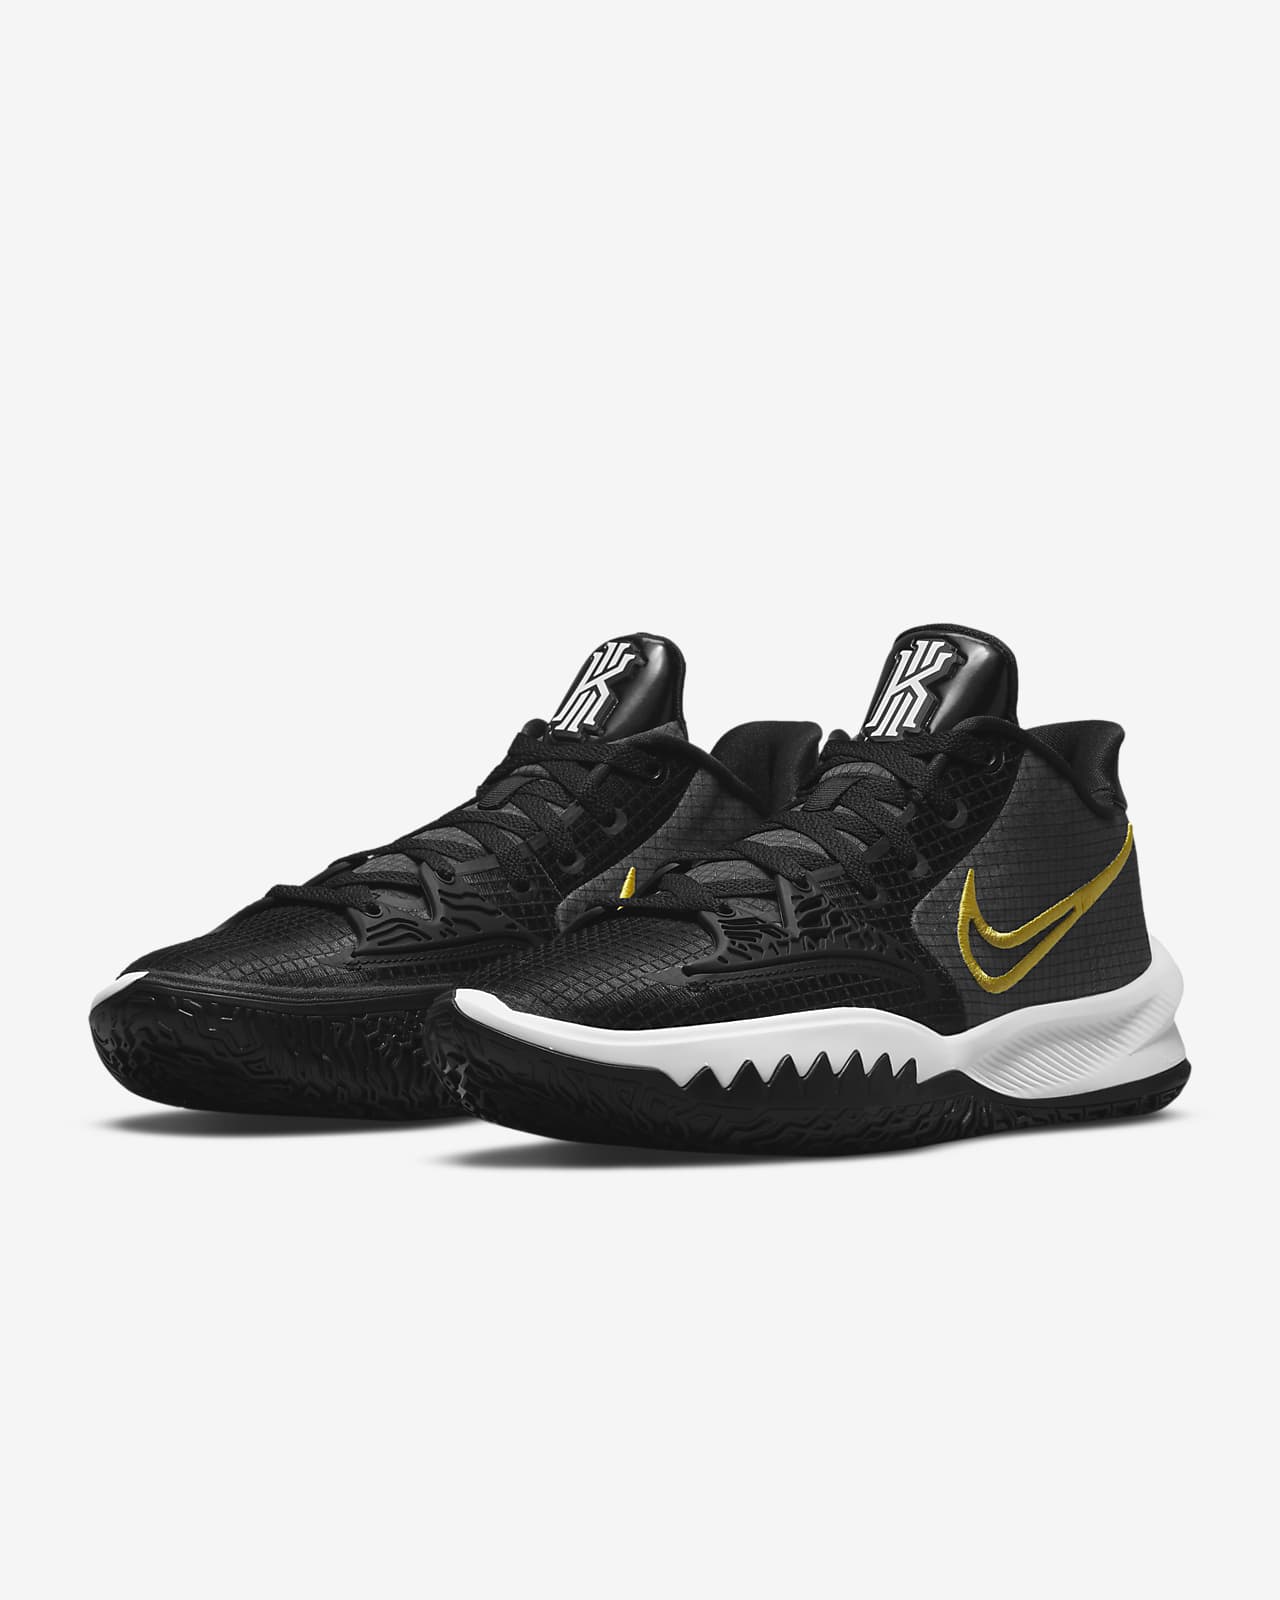 kyrie low yellow and black